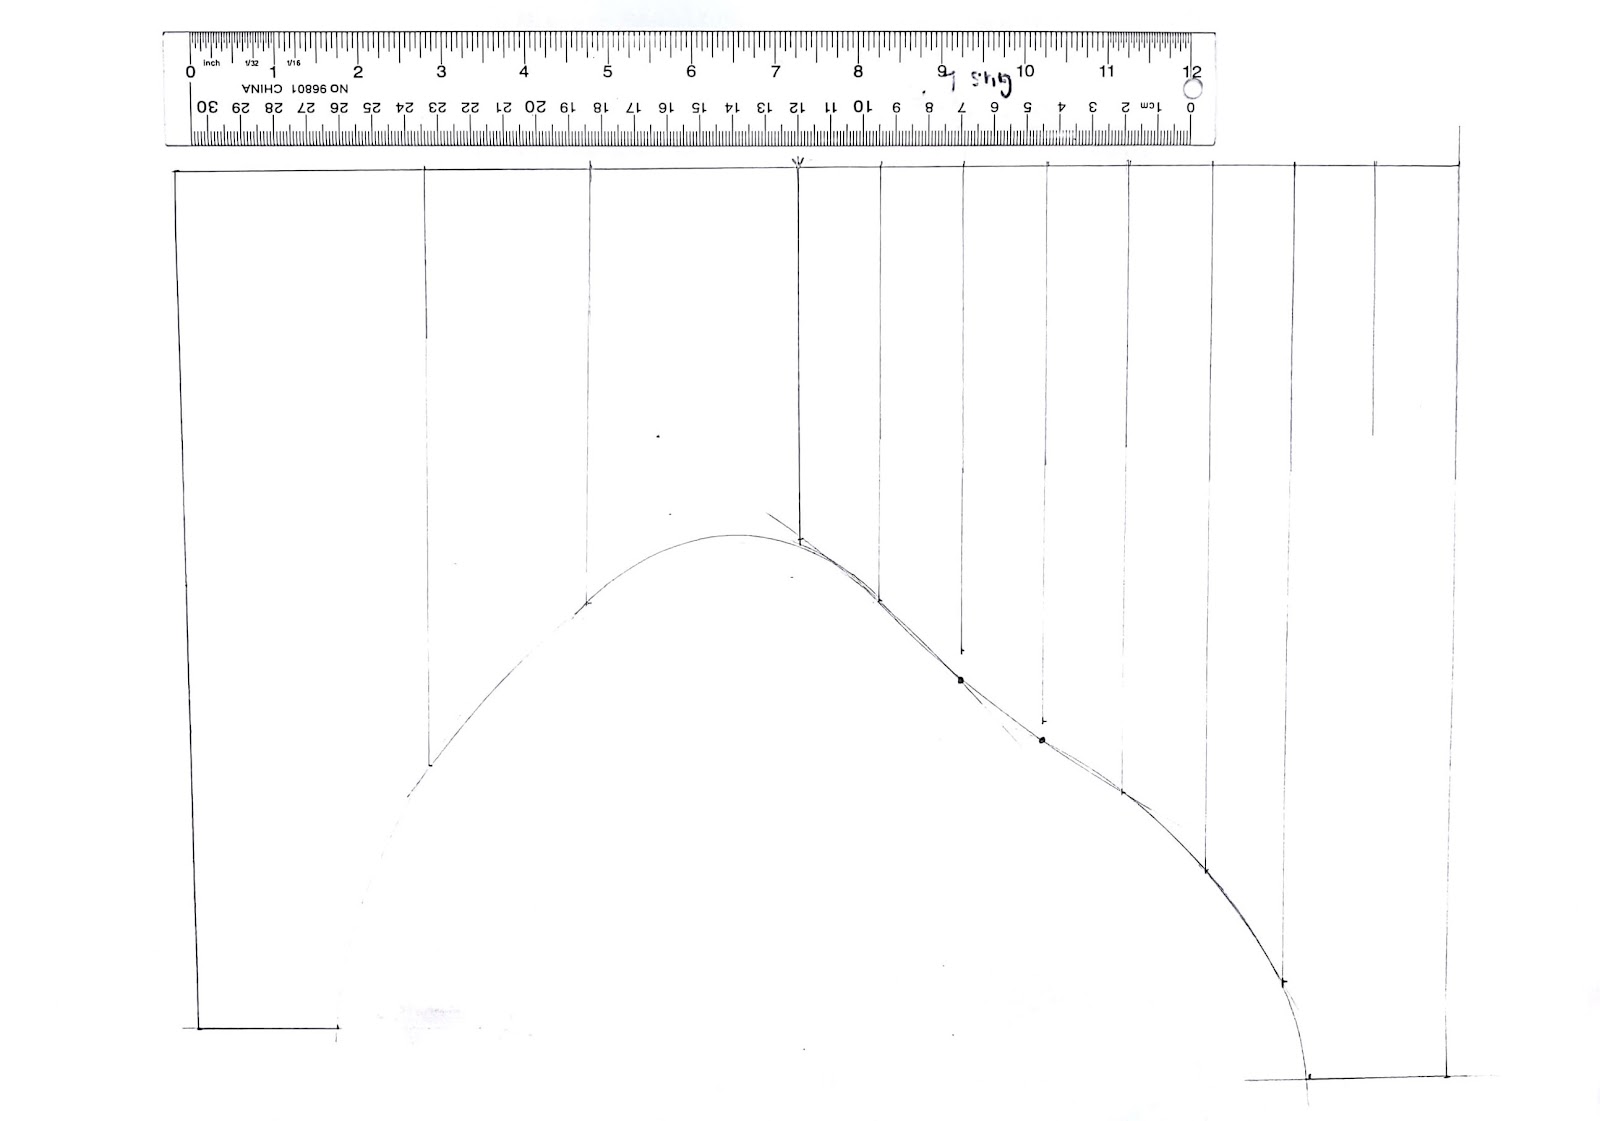 A scan of a hand drafted pattern with a ruler beside it for scale.